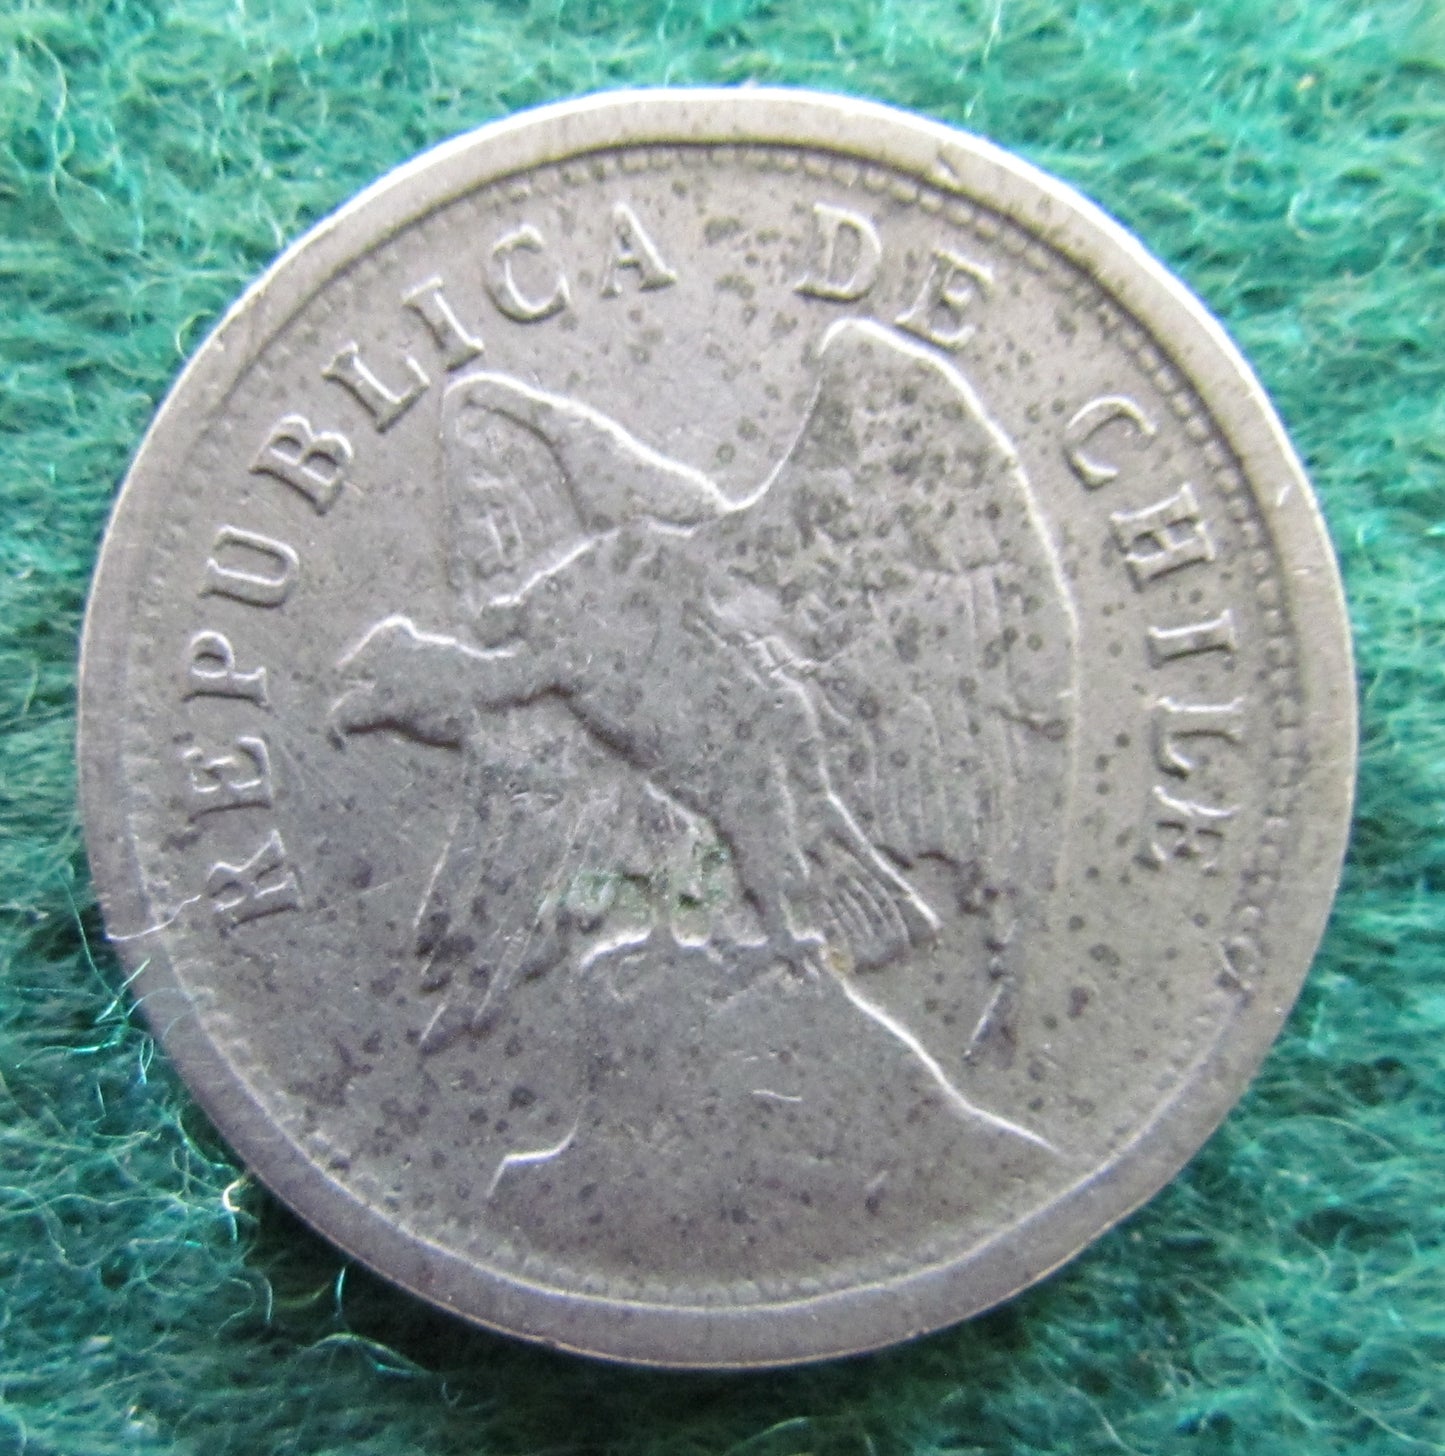 Chile 1924 S 20 Centavos Coin - Circulated